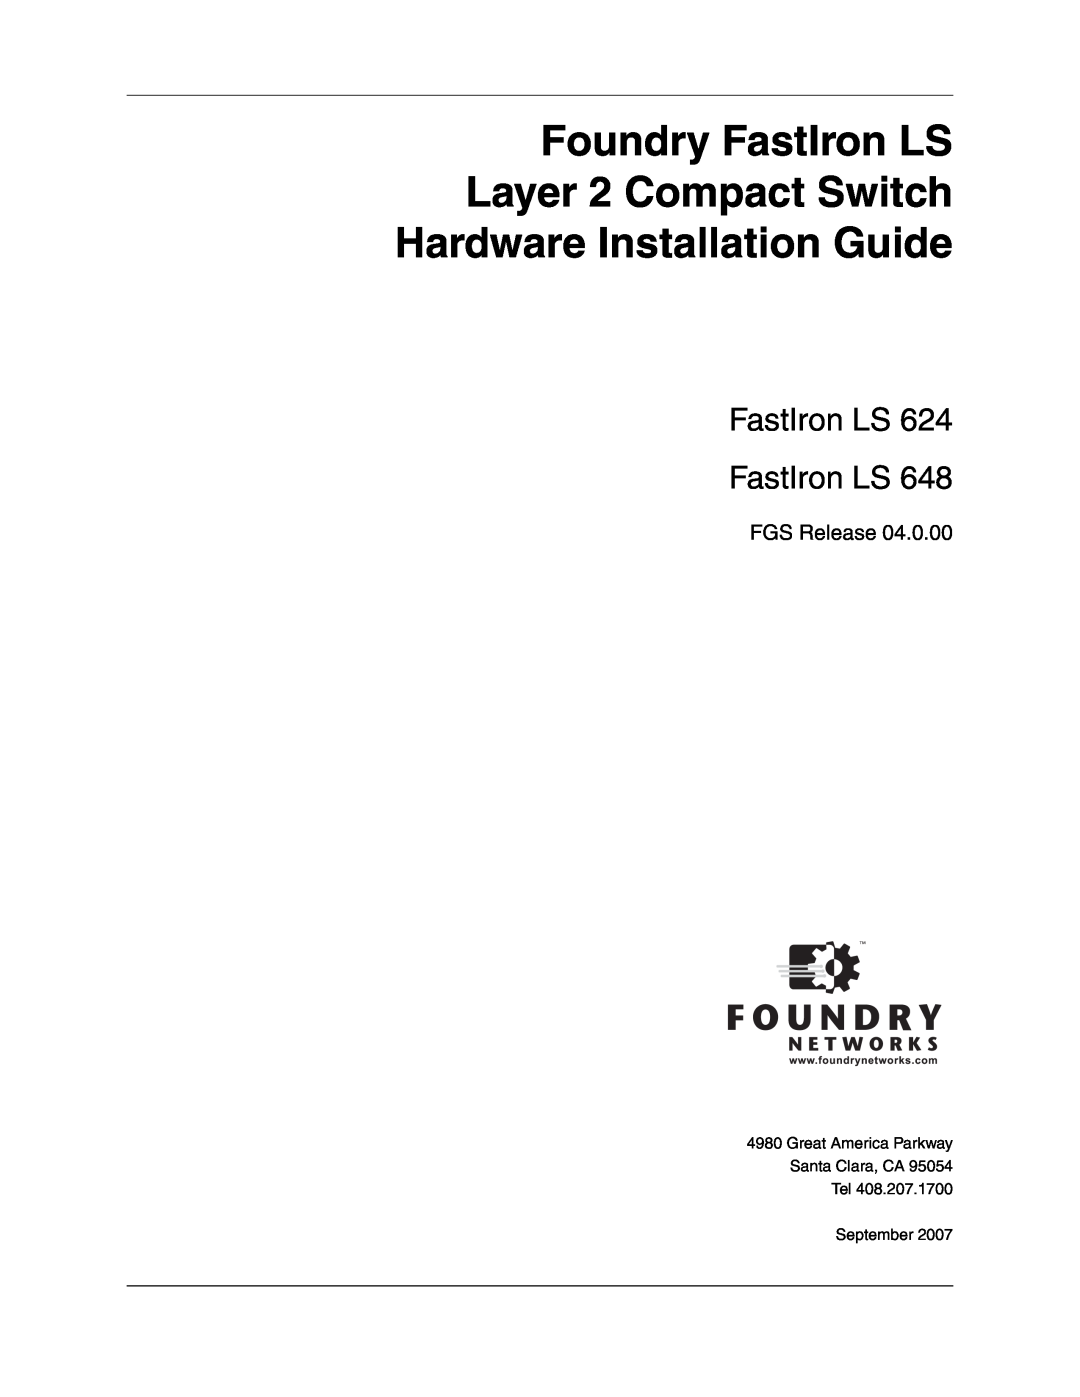 Foundry Networks LS 648 manual Foundry FastIron LS Layer 2 Compact Switch, Hardware Installation Guide, FGS Release 